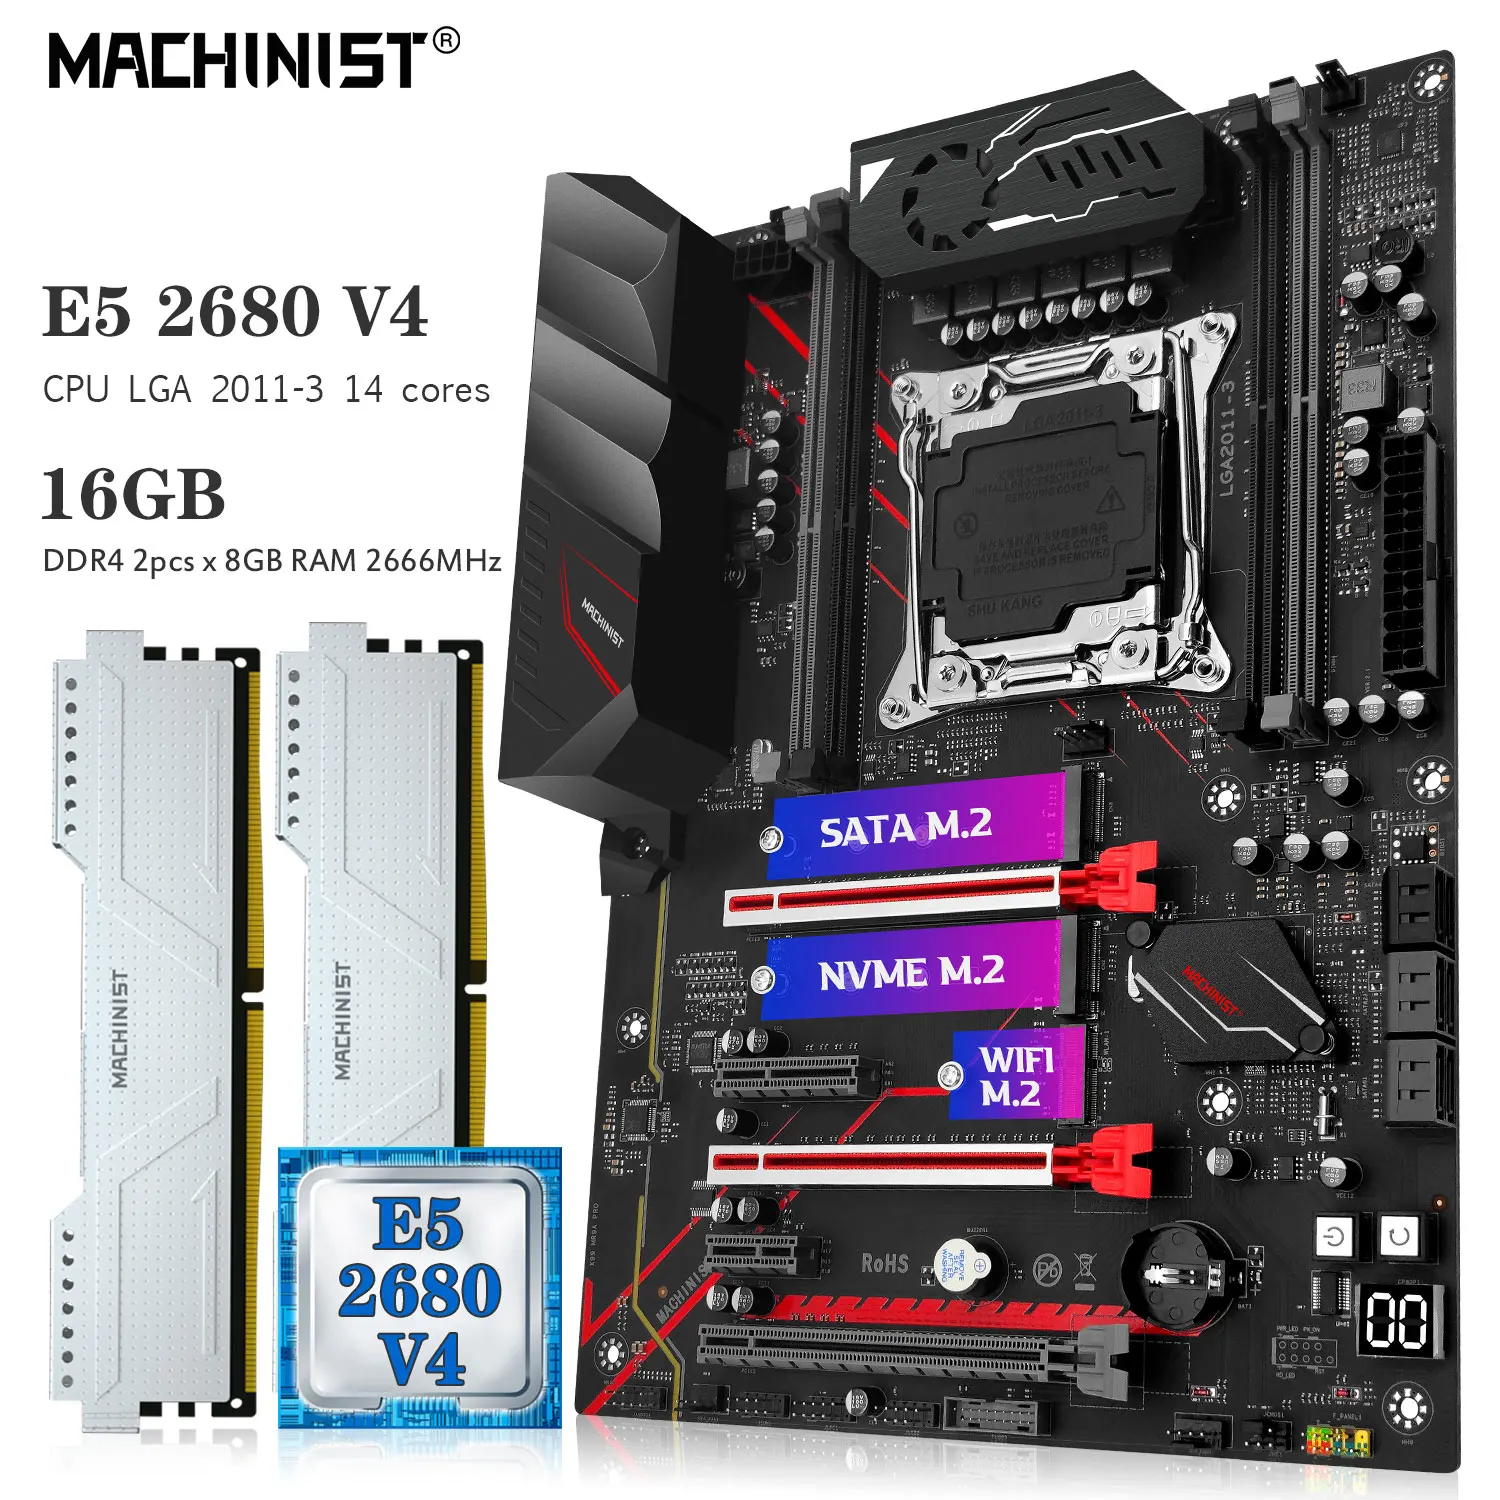 MACHINIST X99 Motherboard Combo Xeon E5 2680 V4 CPU Kit 16GB 2666MHz DDR4 RAM Memory LAG 2011-3 Four channel NVME M.2 MR9A PRO